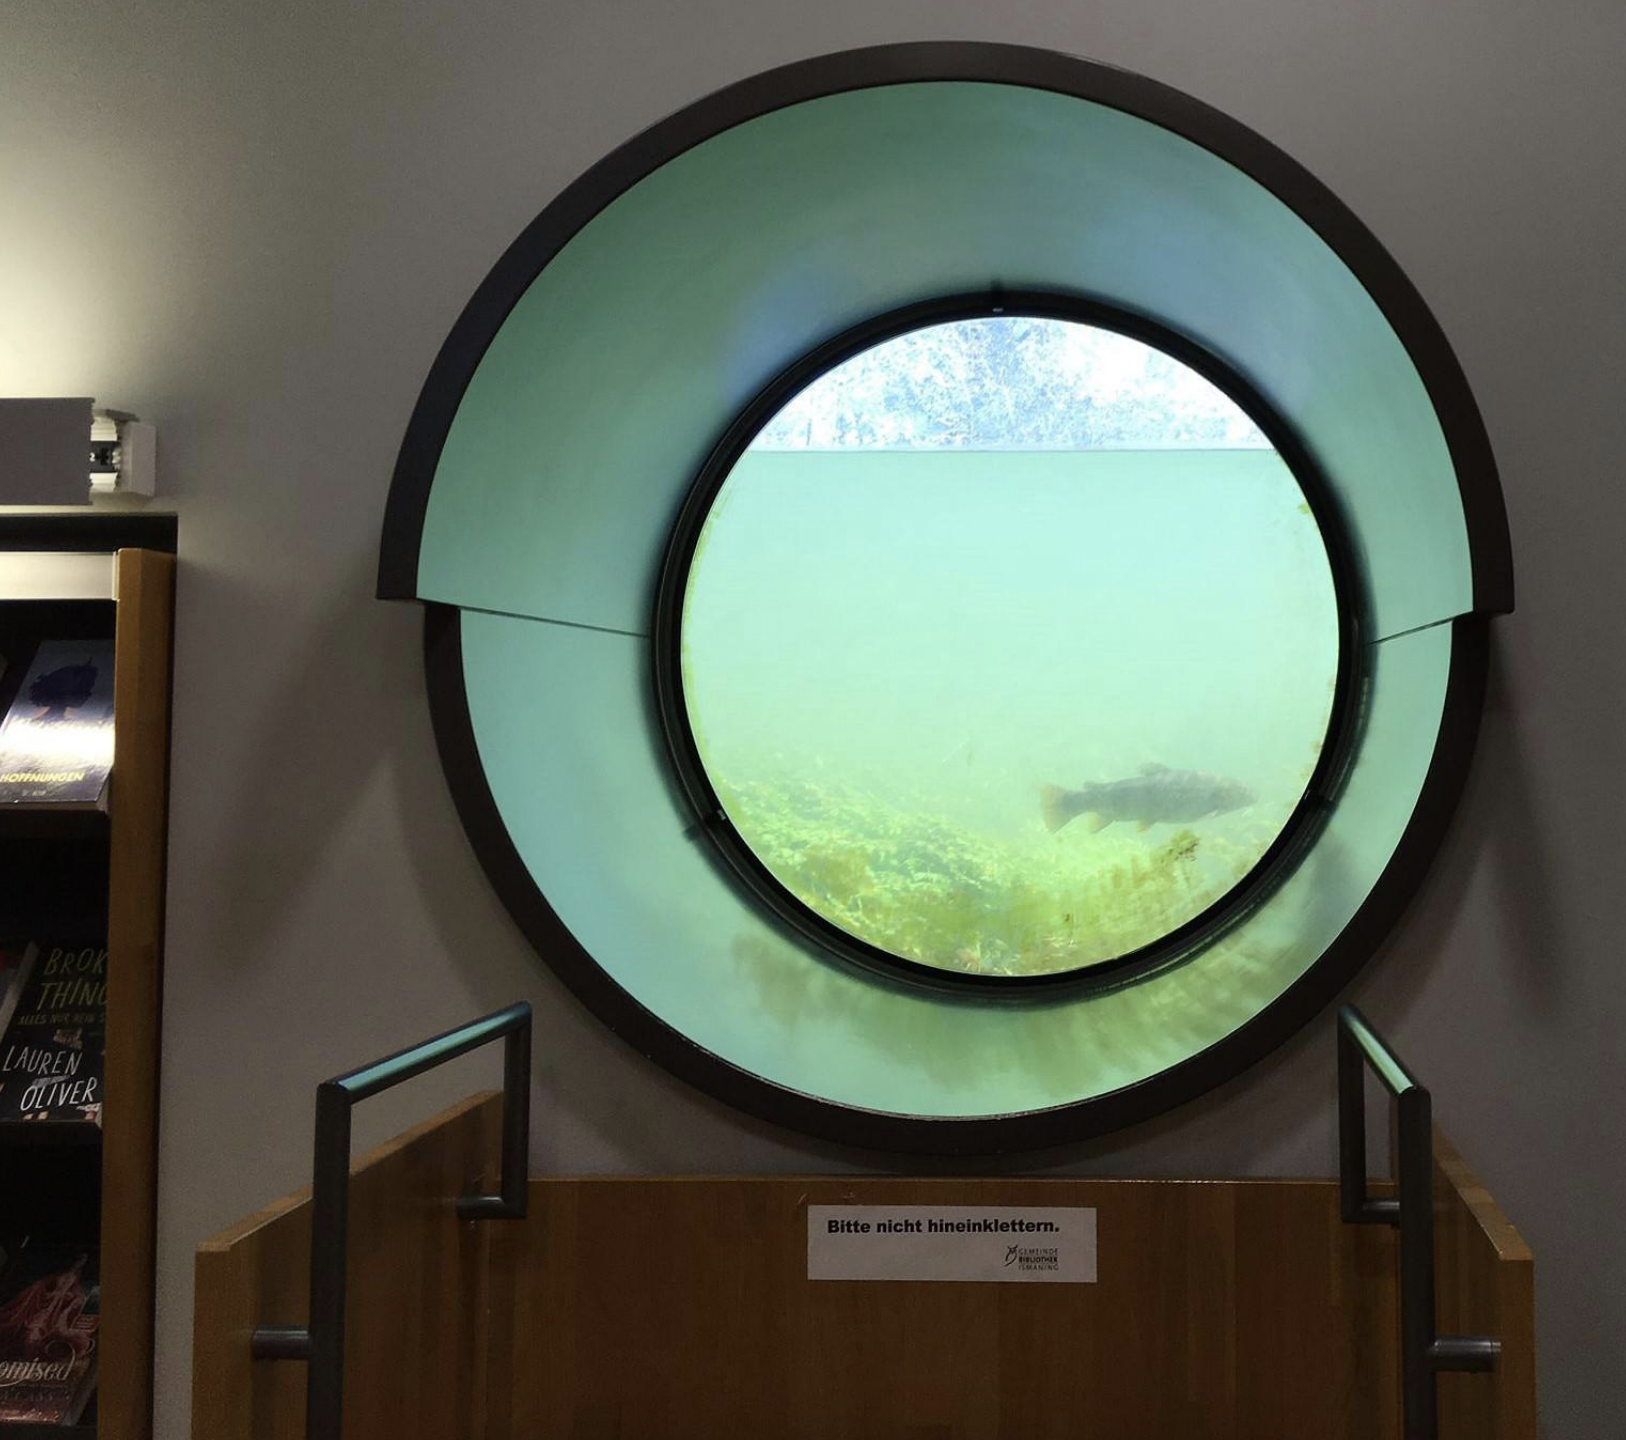 The circular window shows a fish swimming by